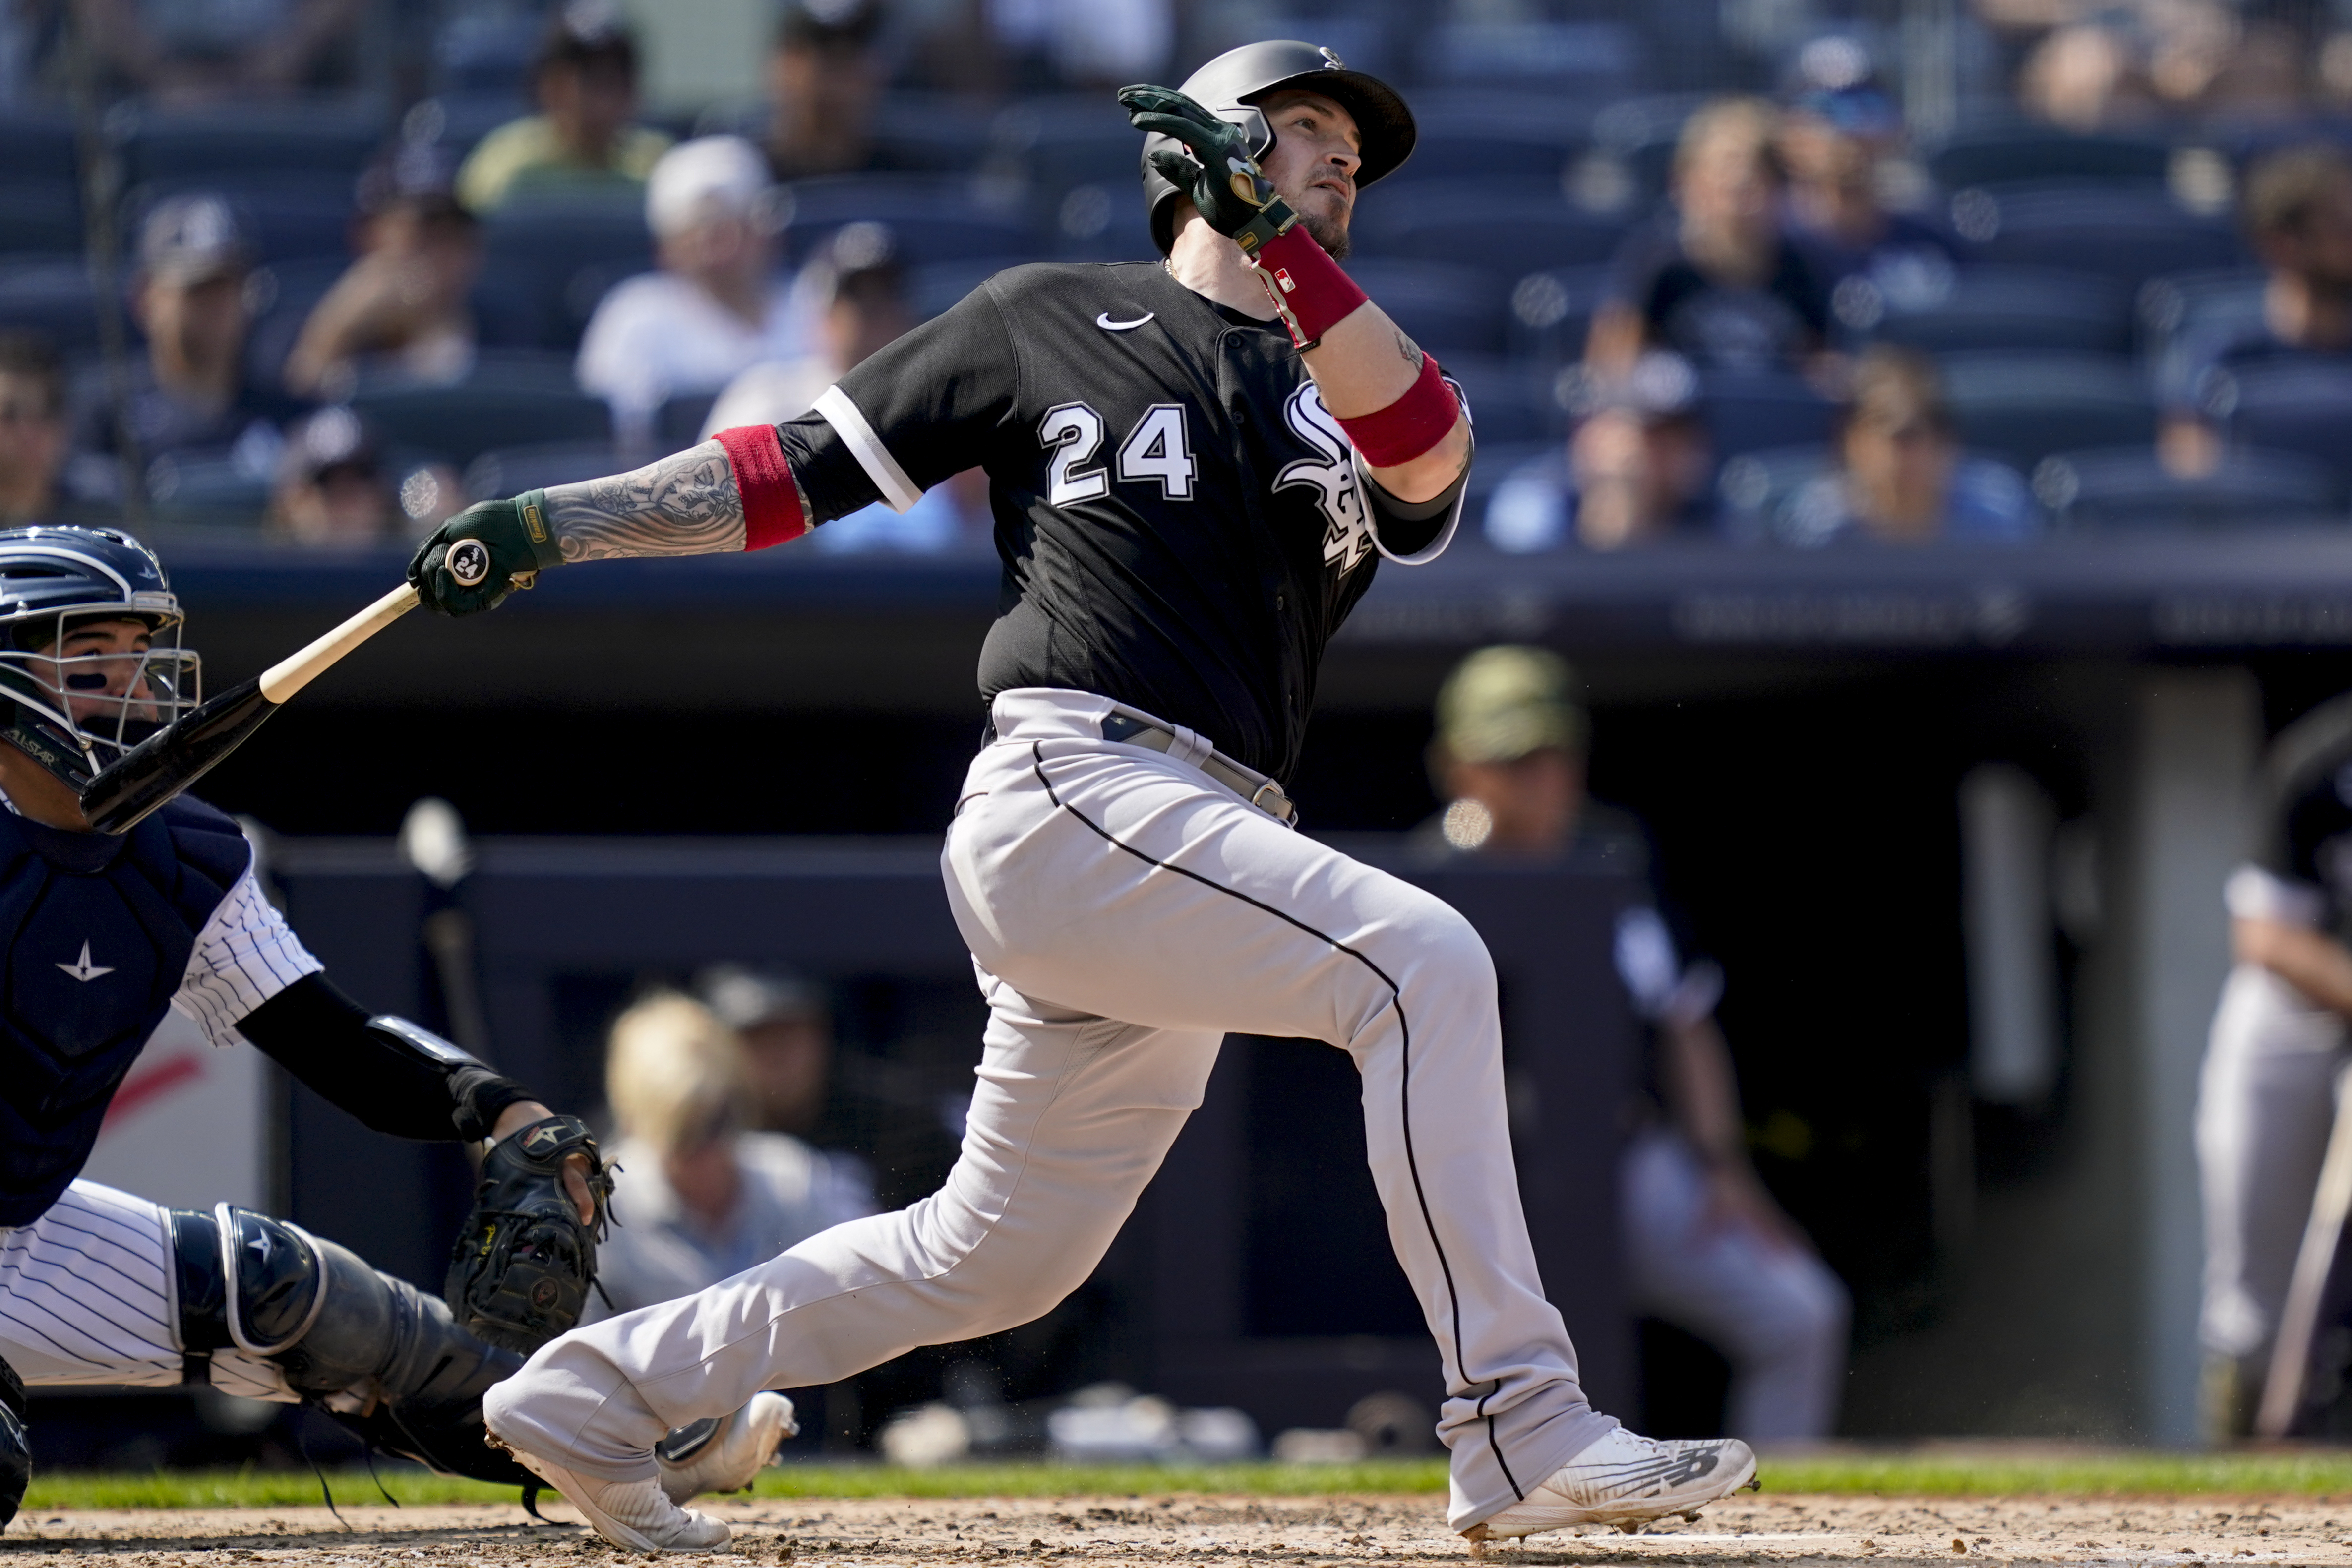 Anderson's HR hushes Yankees, lifts Chisox to twinbill sweep